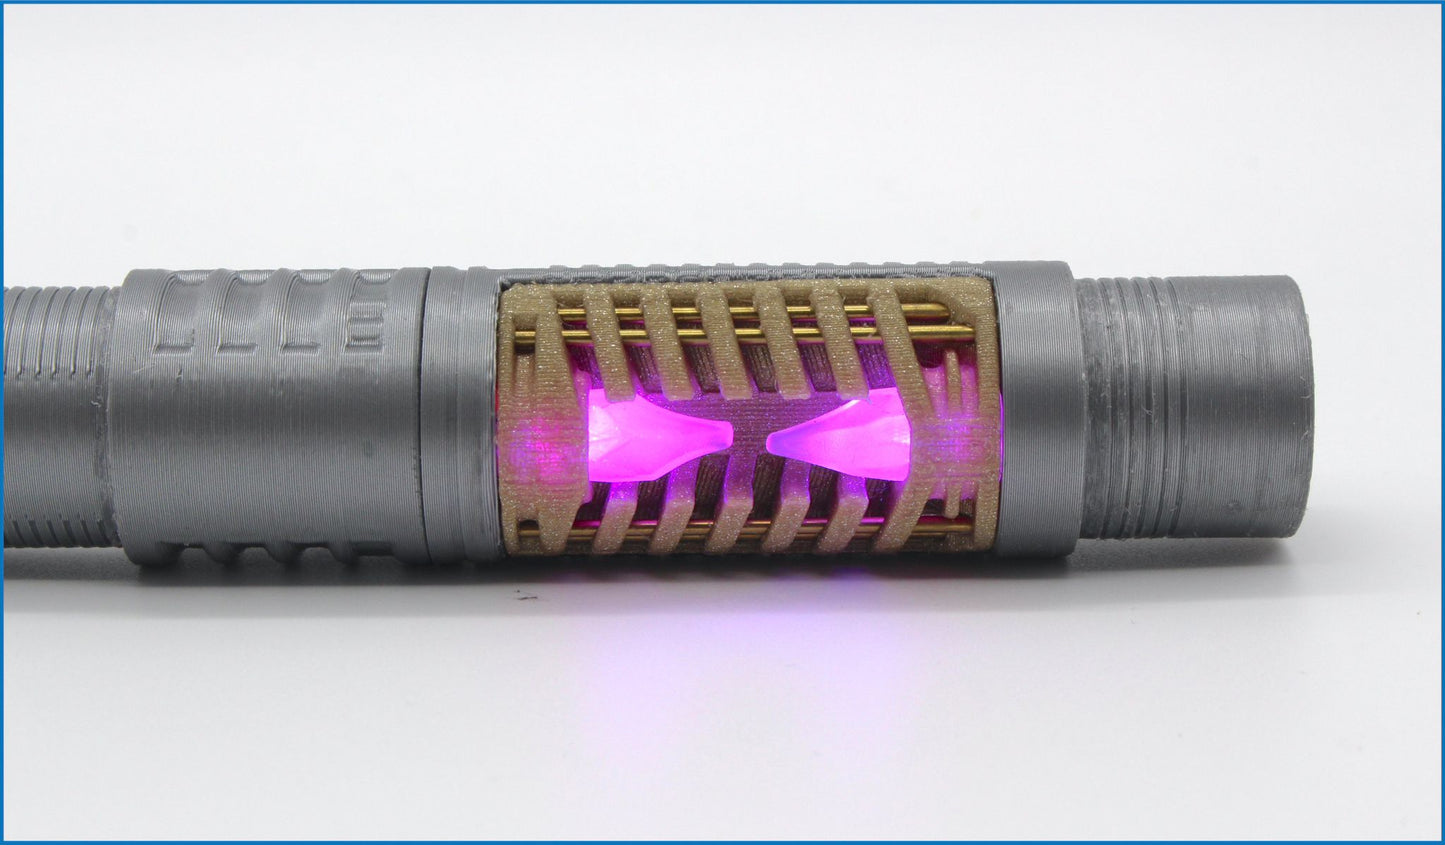 Collectors Edition Lightsaber - Collectors Edition Saber - KR Mace Crystal Chassis - Padawan Outpost